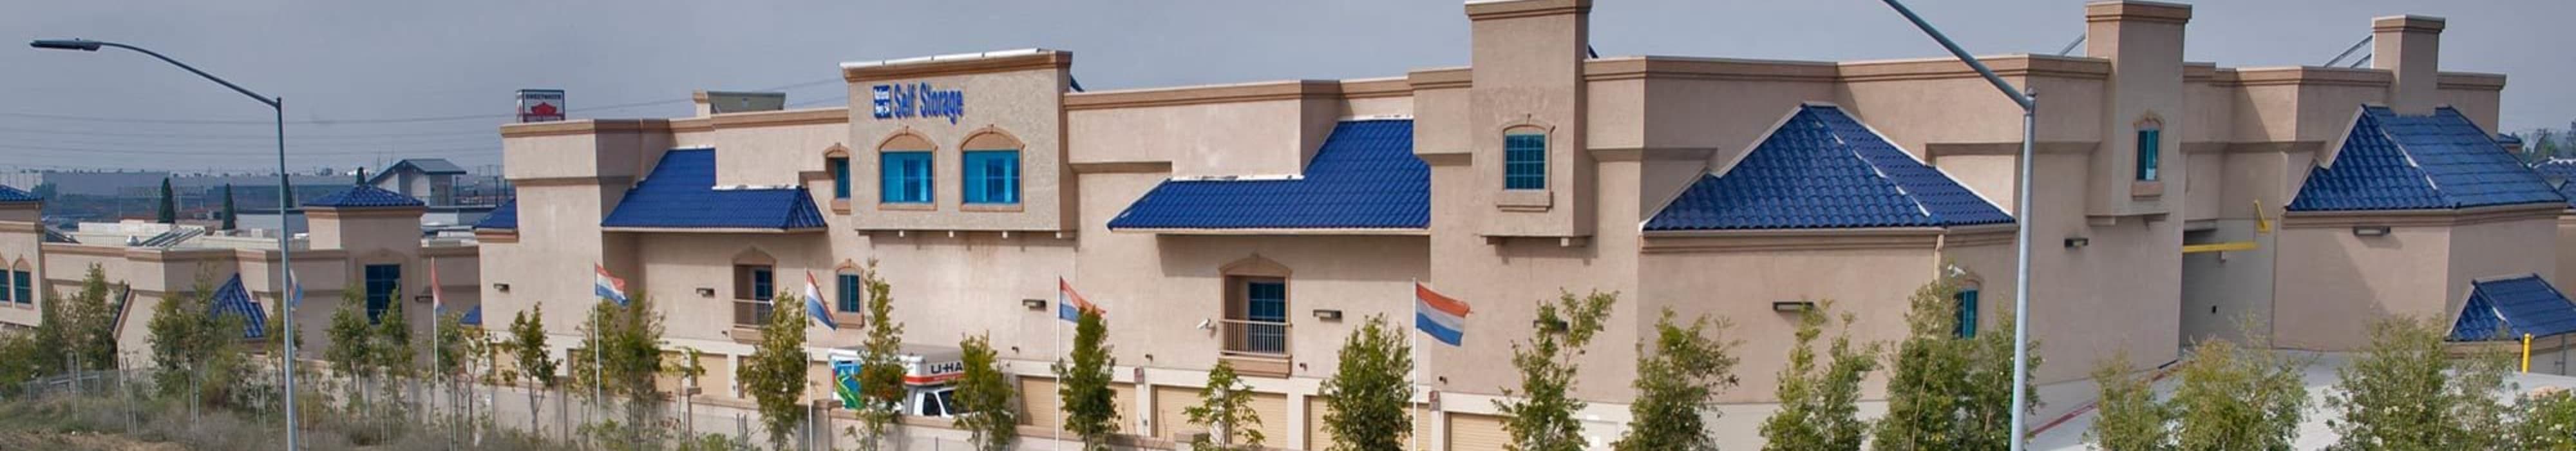 Branding on the exterior of National/54 Self Storage in National City, California